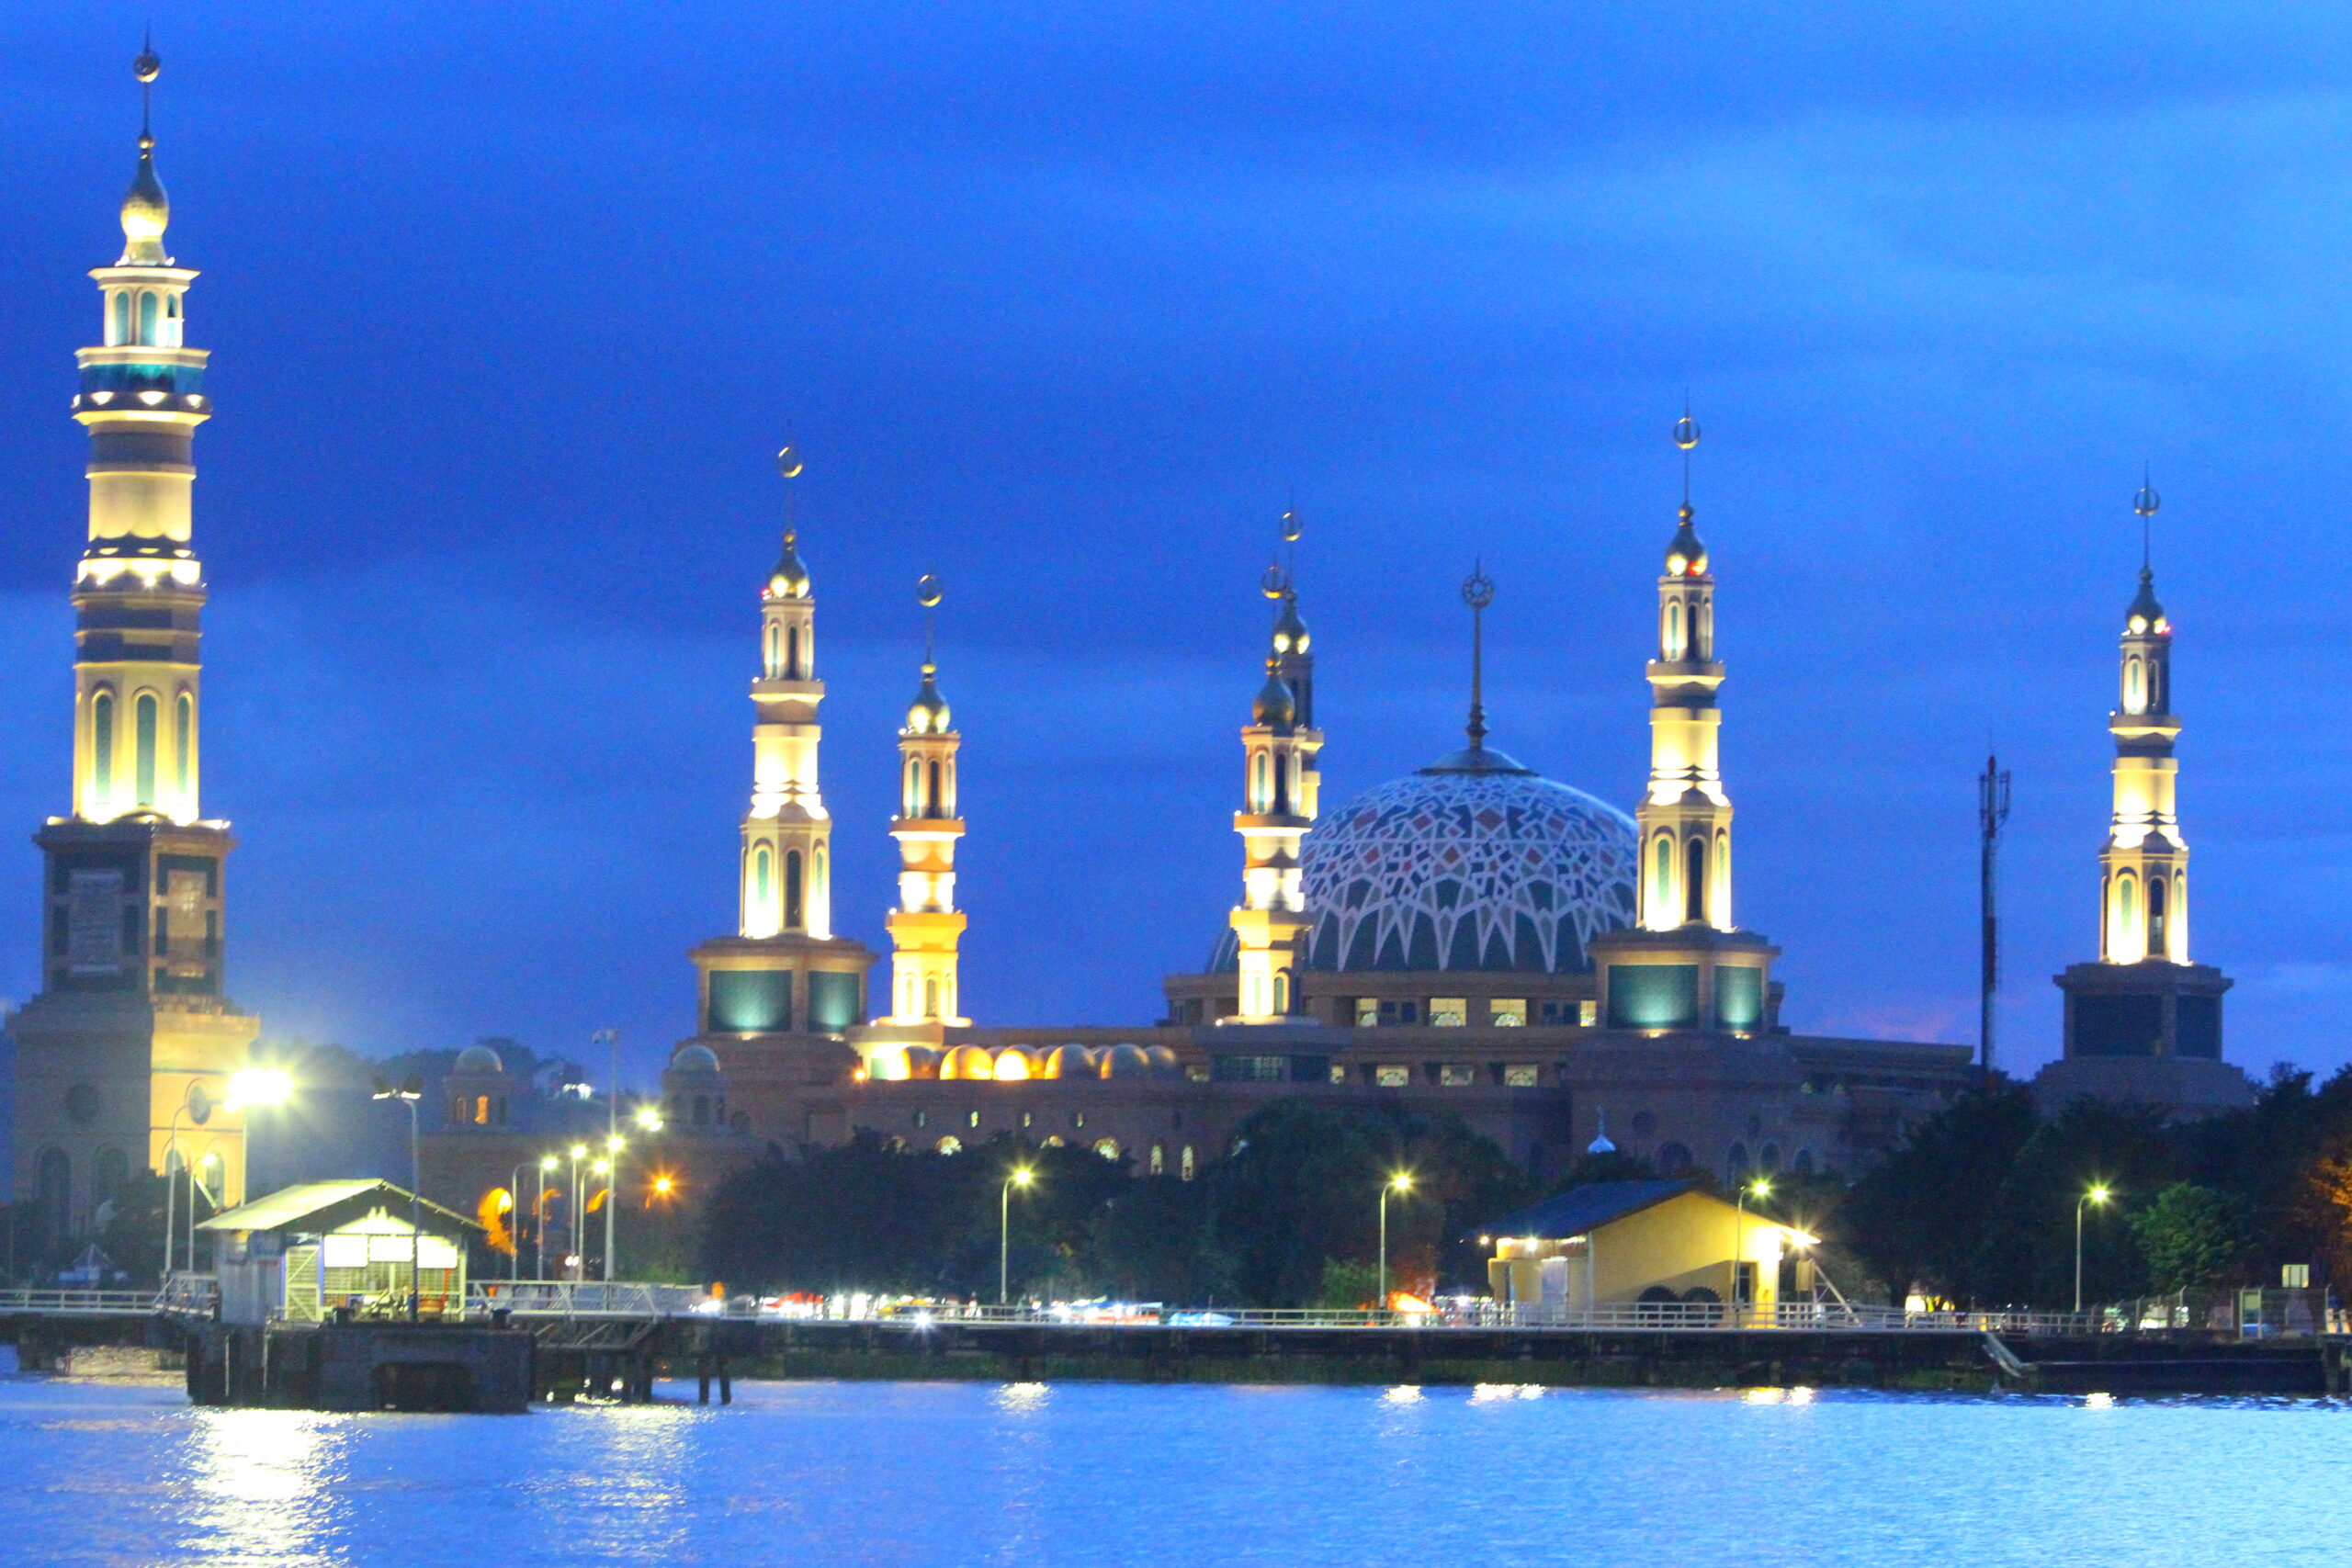 Big mosque in a riverside at dusk